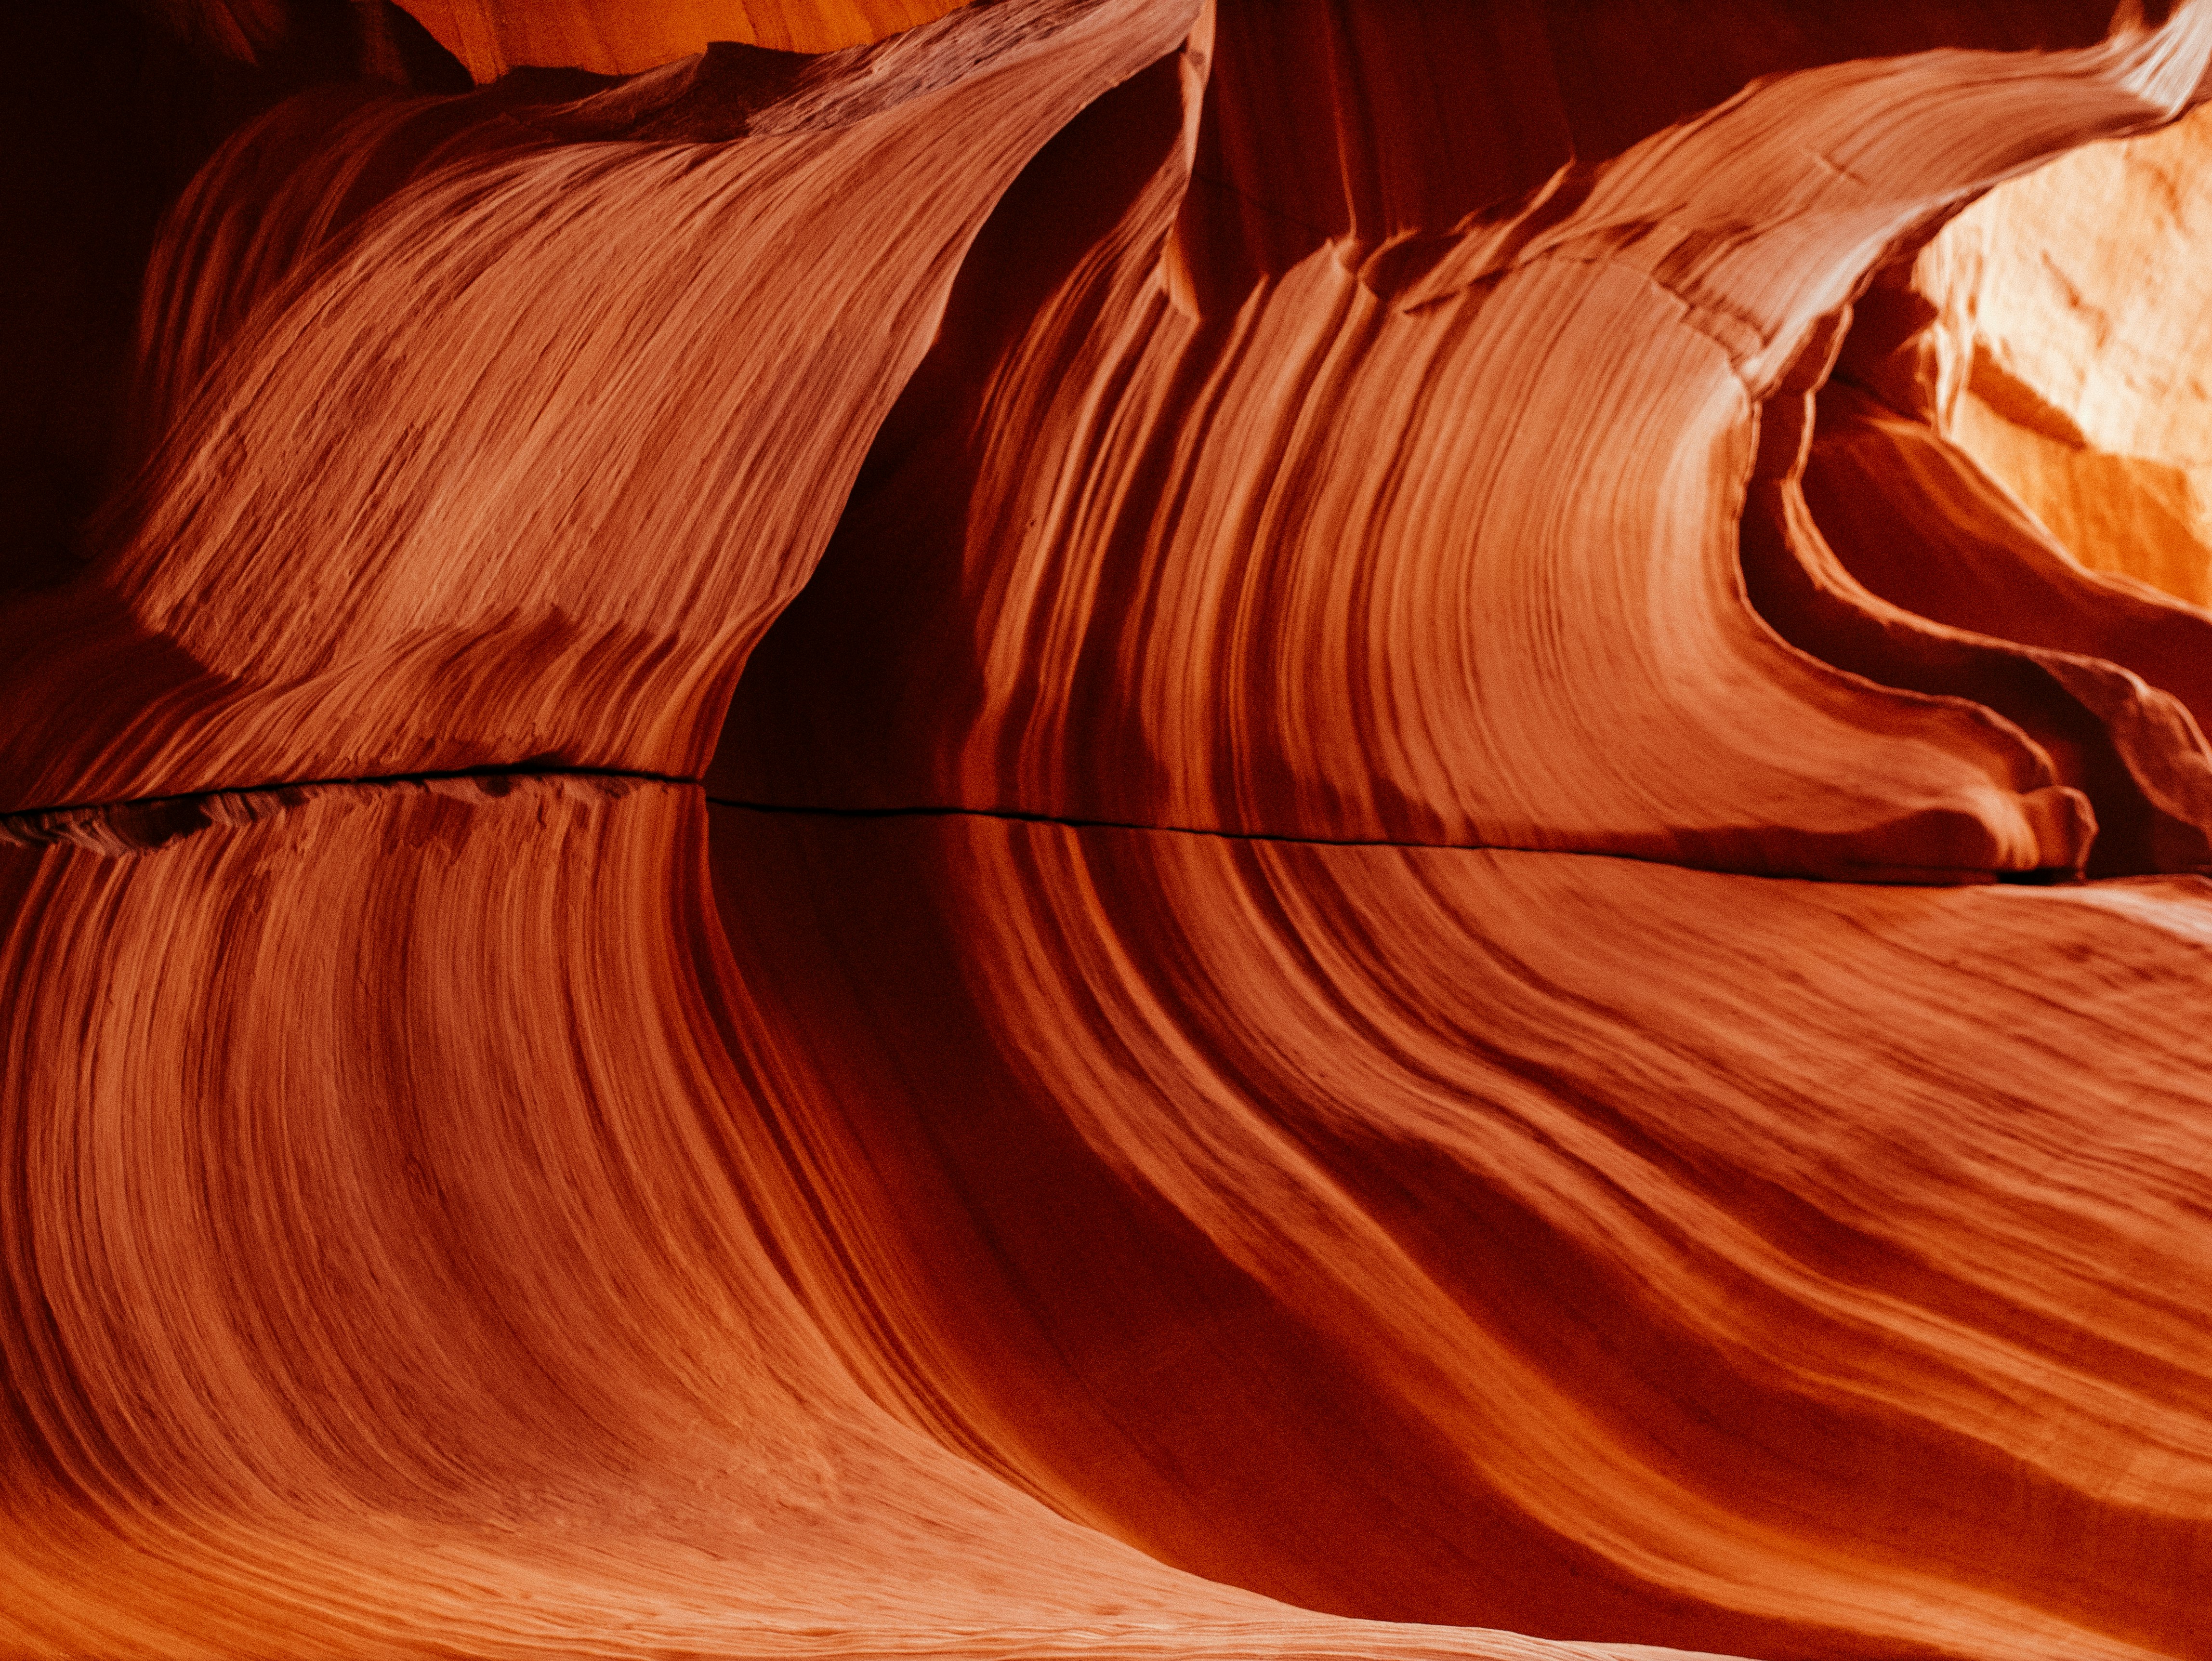 Canyon X, Lower Antelope Canyon in Arizona. Beautiful sandstone structures.